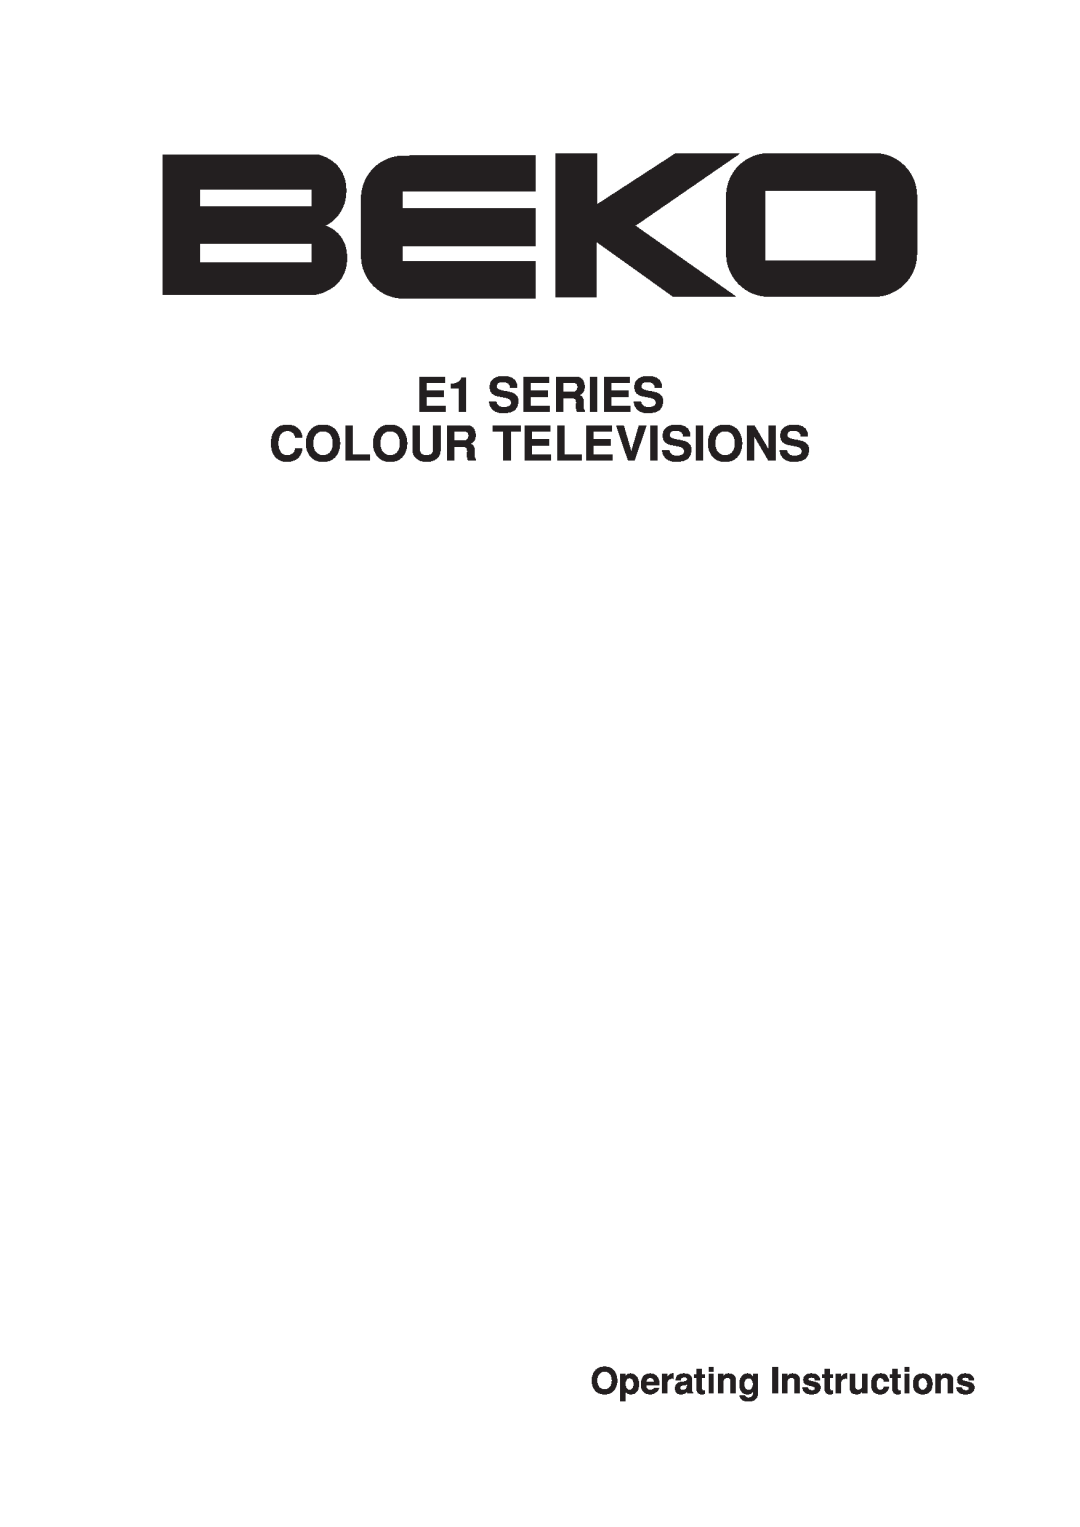 Beko manual E1 SERIES COLOUR TELEVISIONS, Operating Instructions 